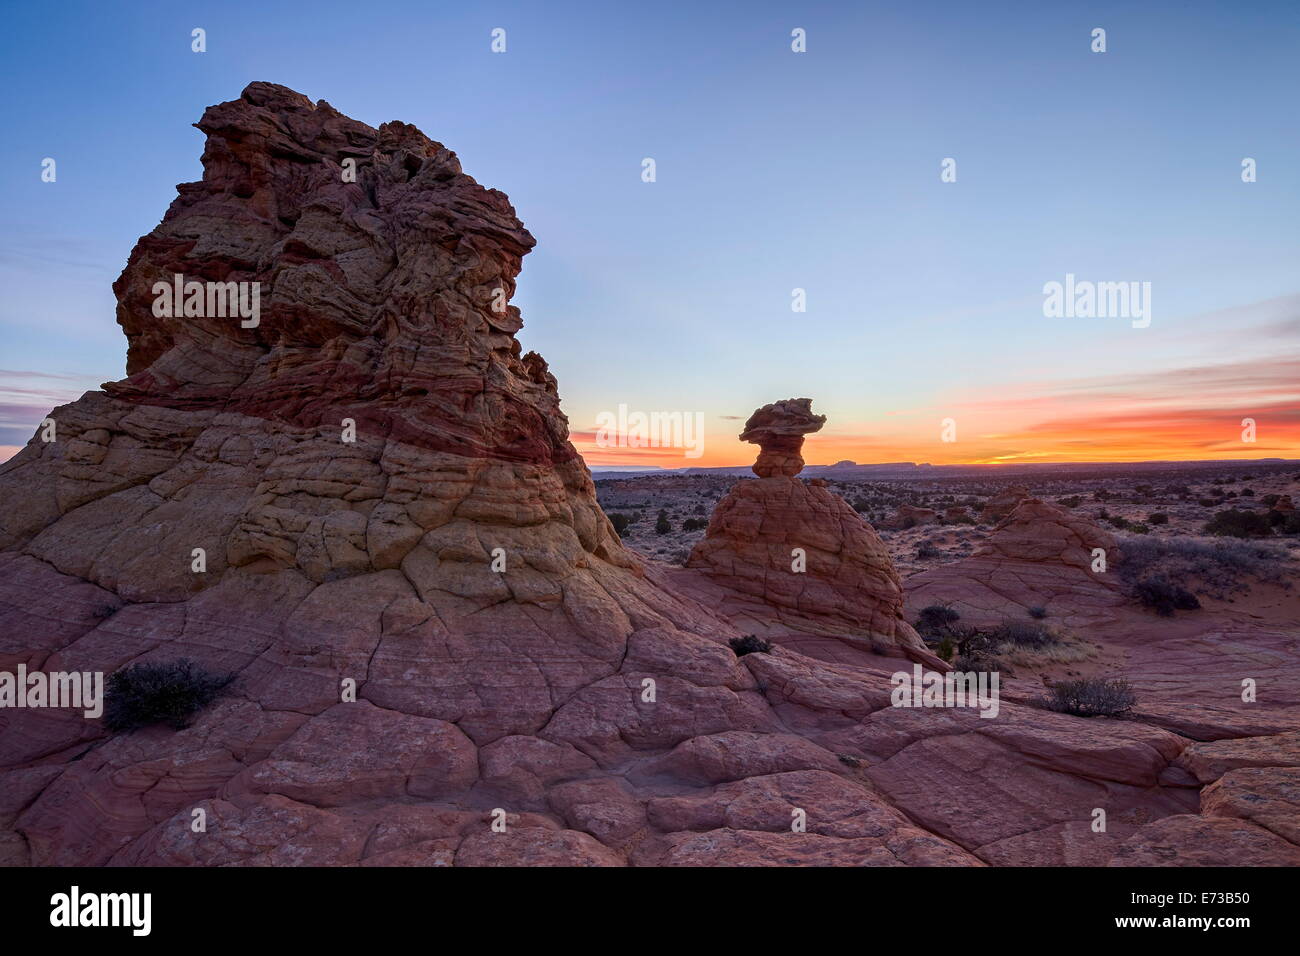 Sandstone formation at dawn with orange clouds, Coyote Buttes Wilderness, Vermilion Cliffs National Monument, Arizona, USA Stock Photo